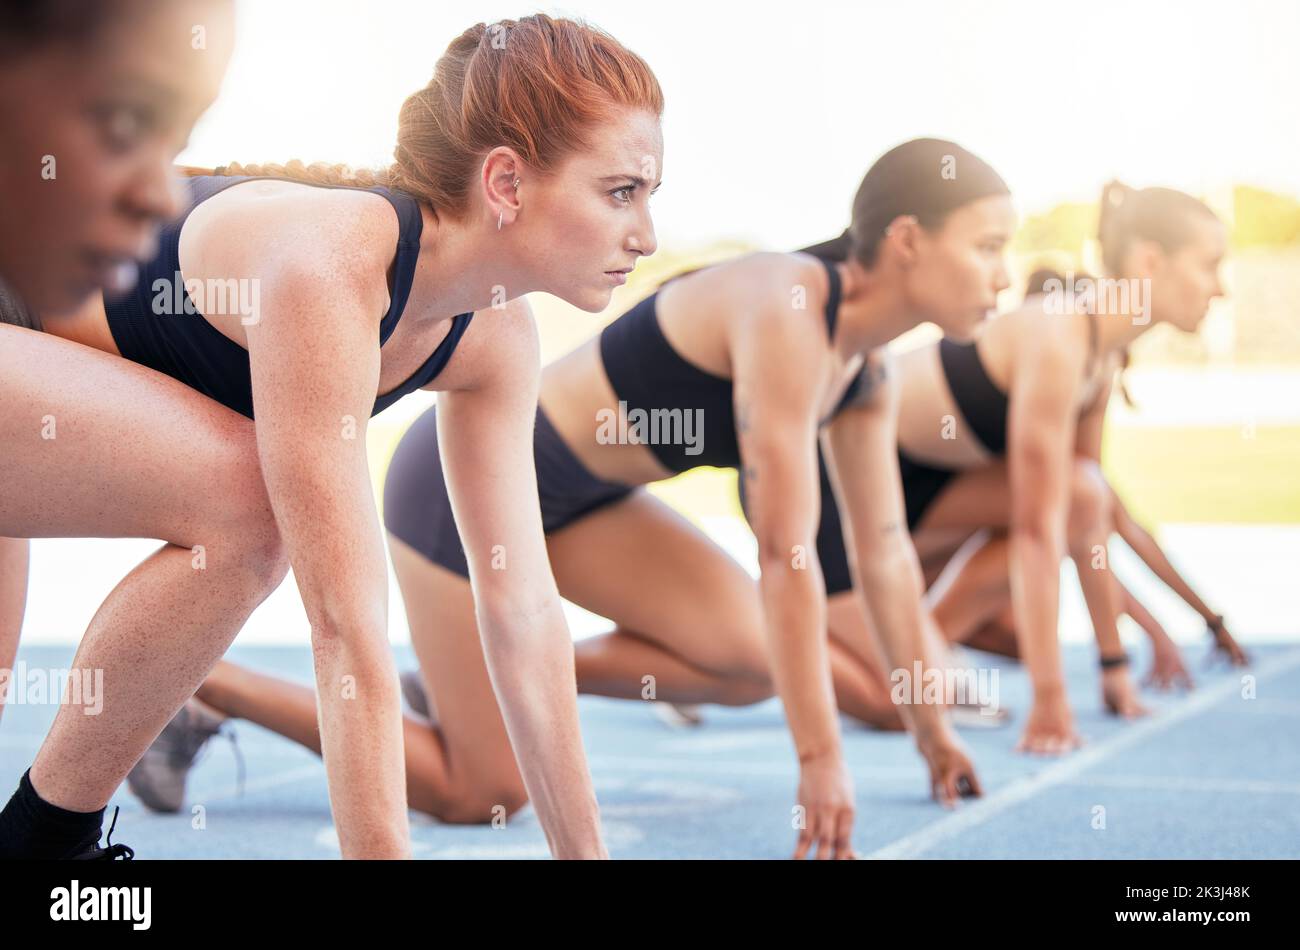 Running competition, sports start and women in marathon race for fitness at stadium, determined to win and power for cardio event together. Focused Stock Photo